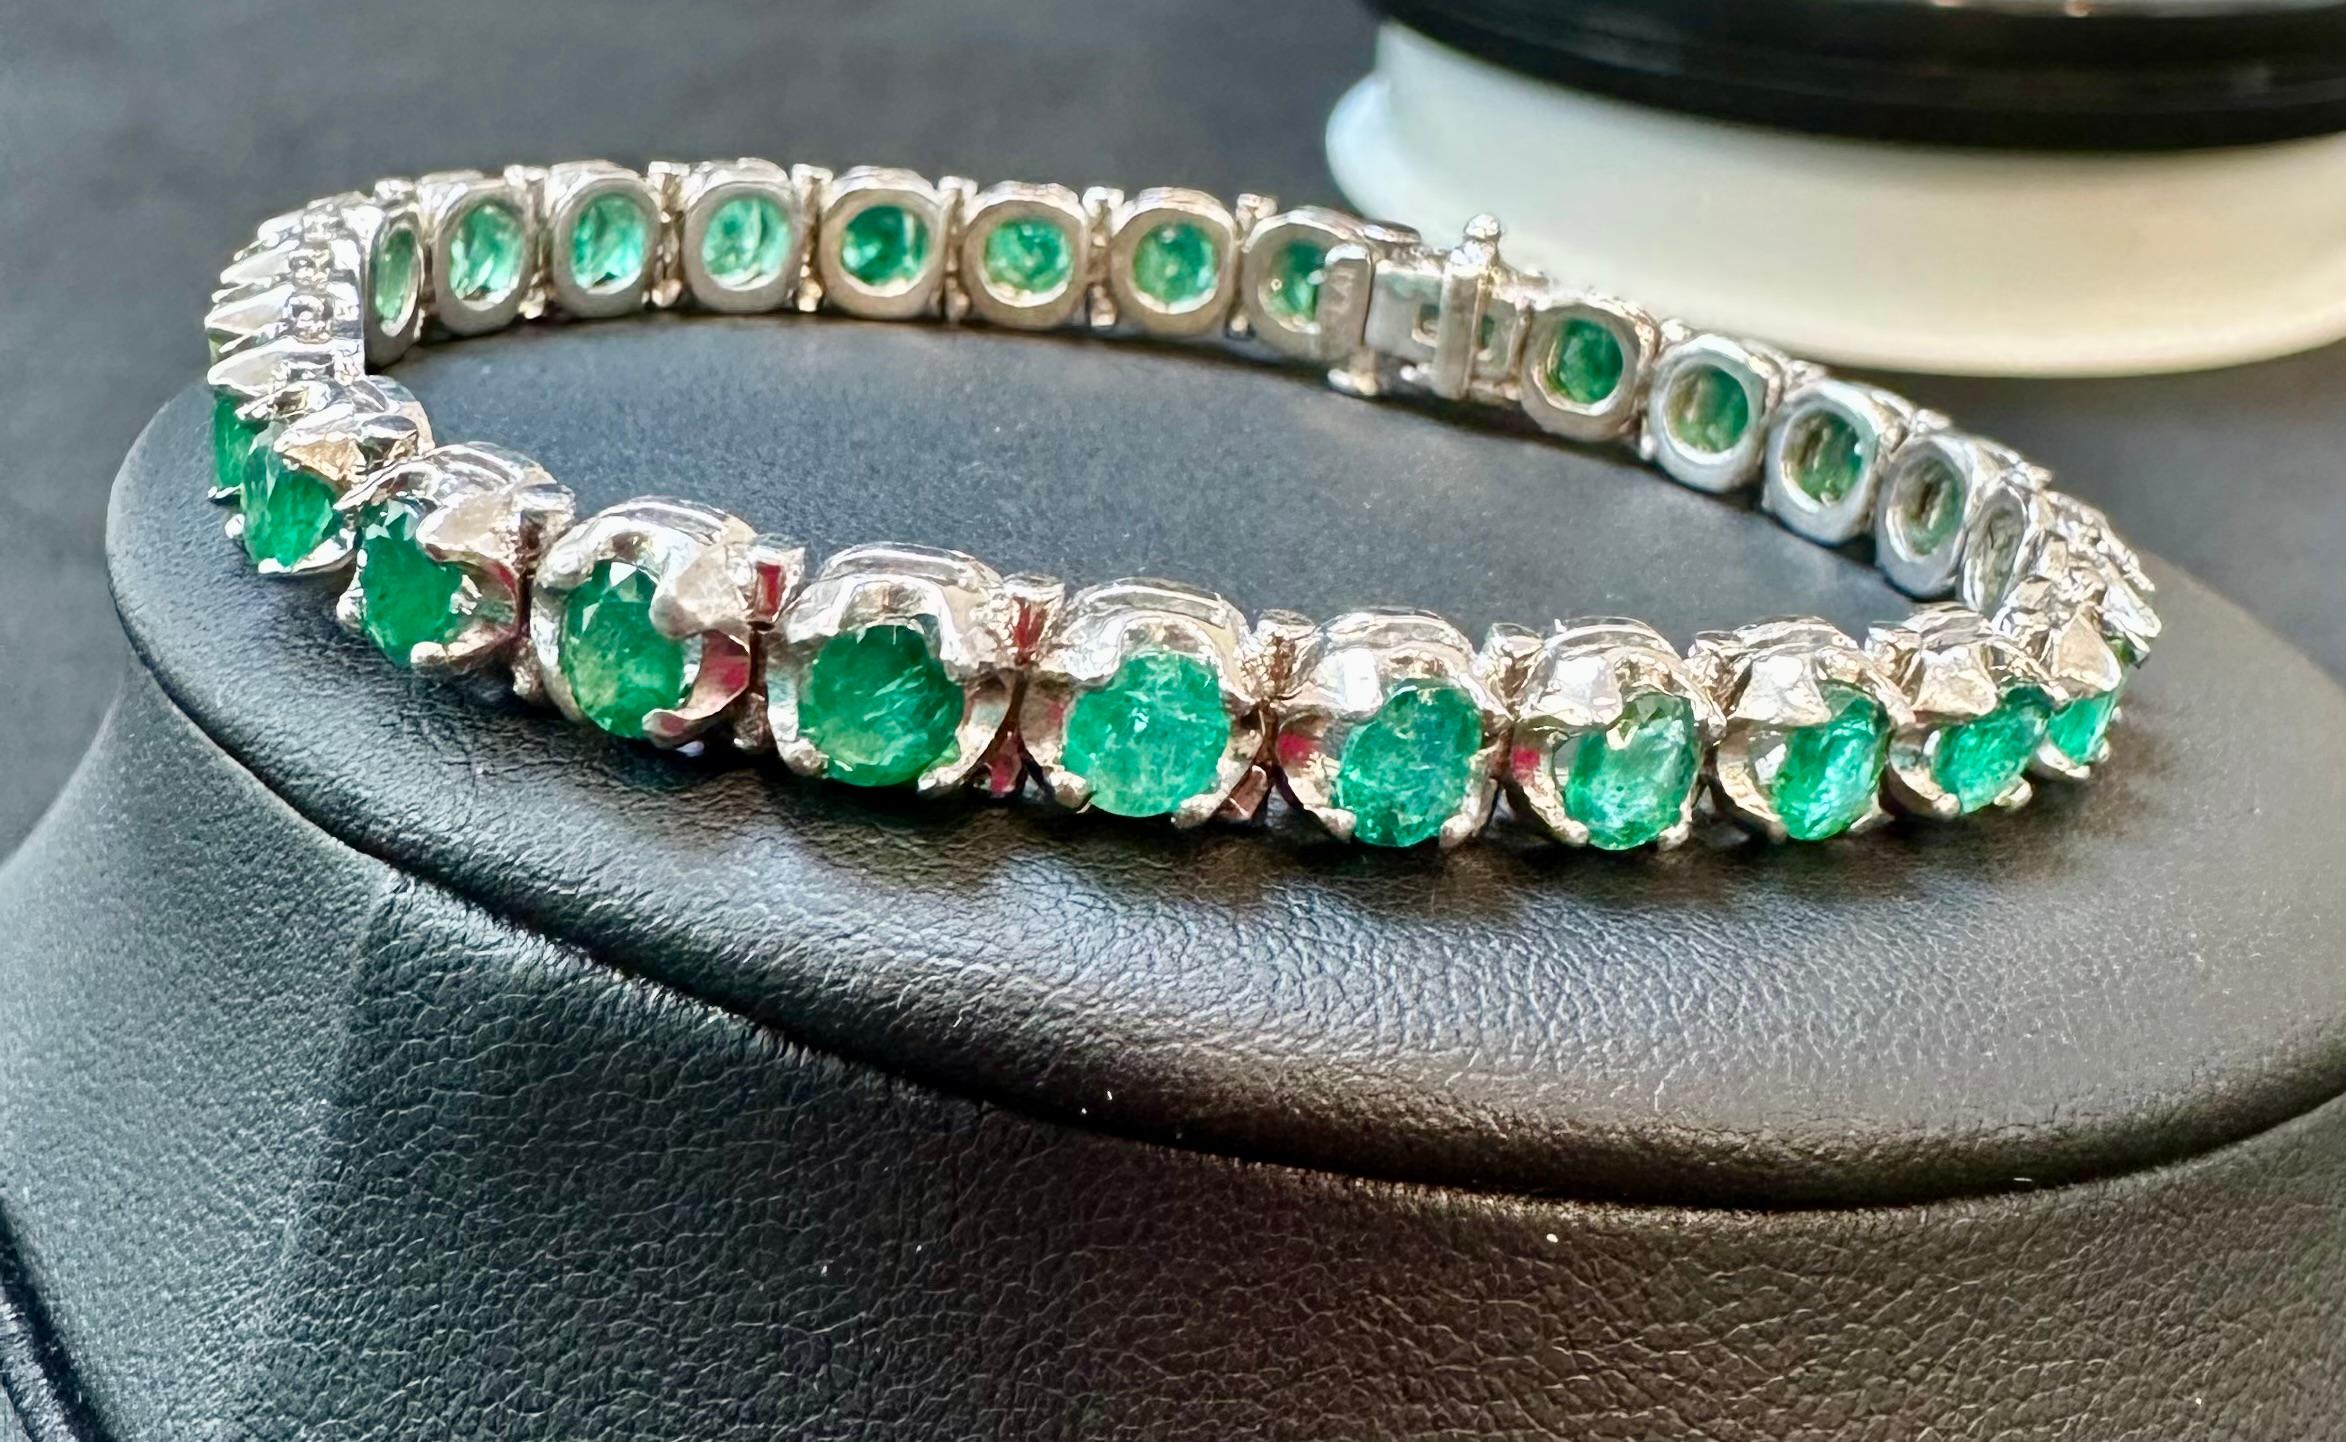  10 Ct Natural Oval Brazilian Emerald  Tennis Bracelet in Platinum , 7.5 Inches For Sale 1